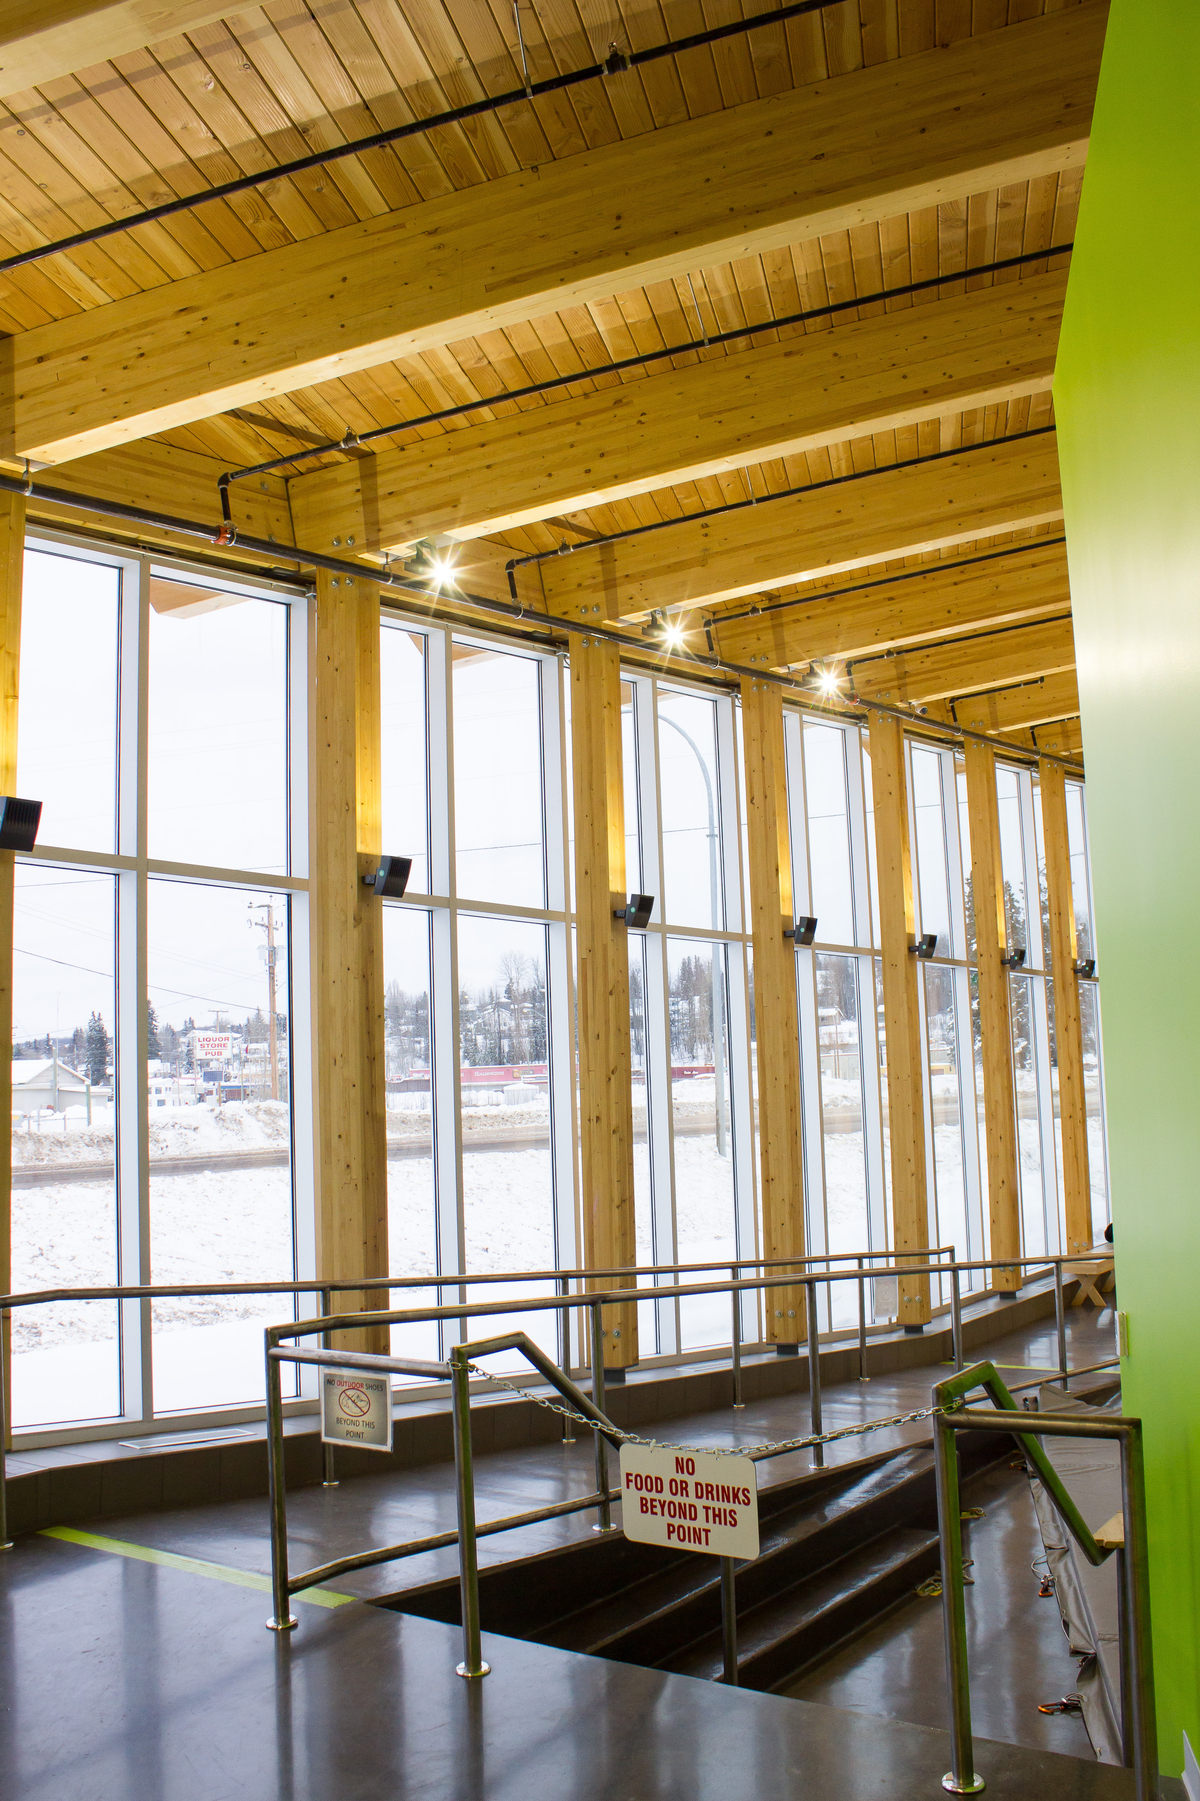 Sunny interior winter image of Burns Lake Lakeside Multiplex showing exposed roof structure of solid plank decking and glue-laminated timber (glulam) beams and supporting columns